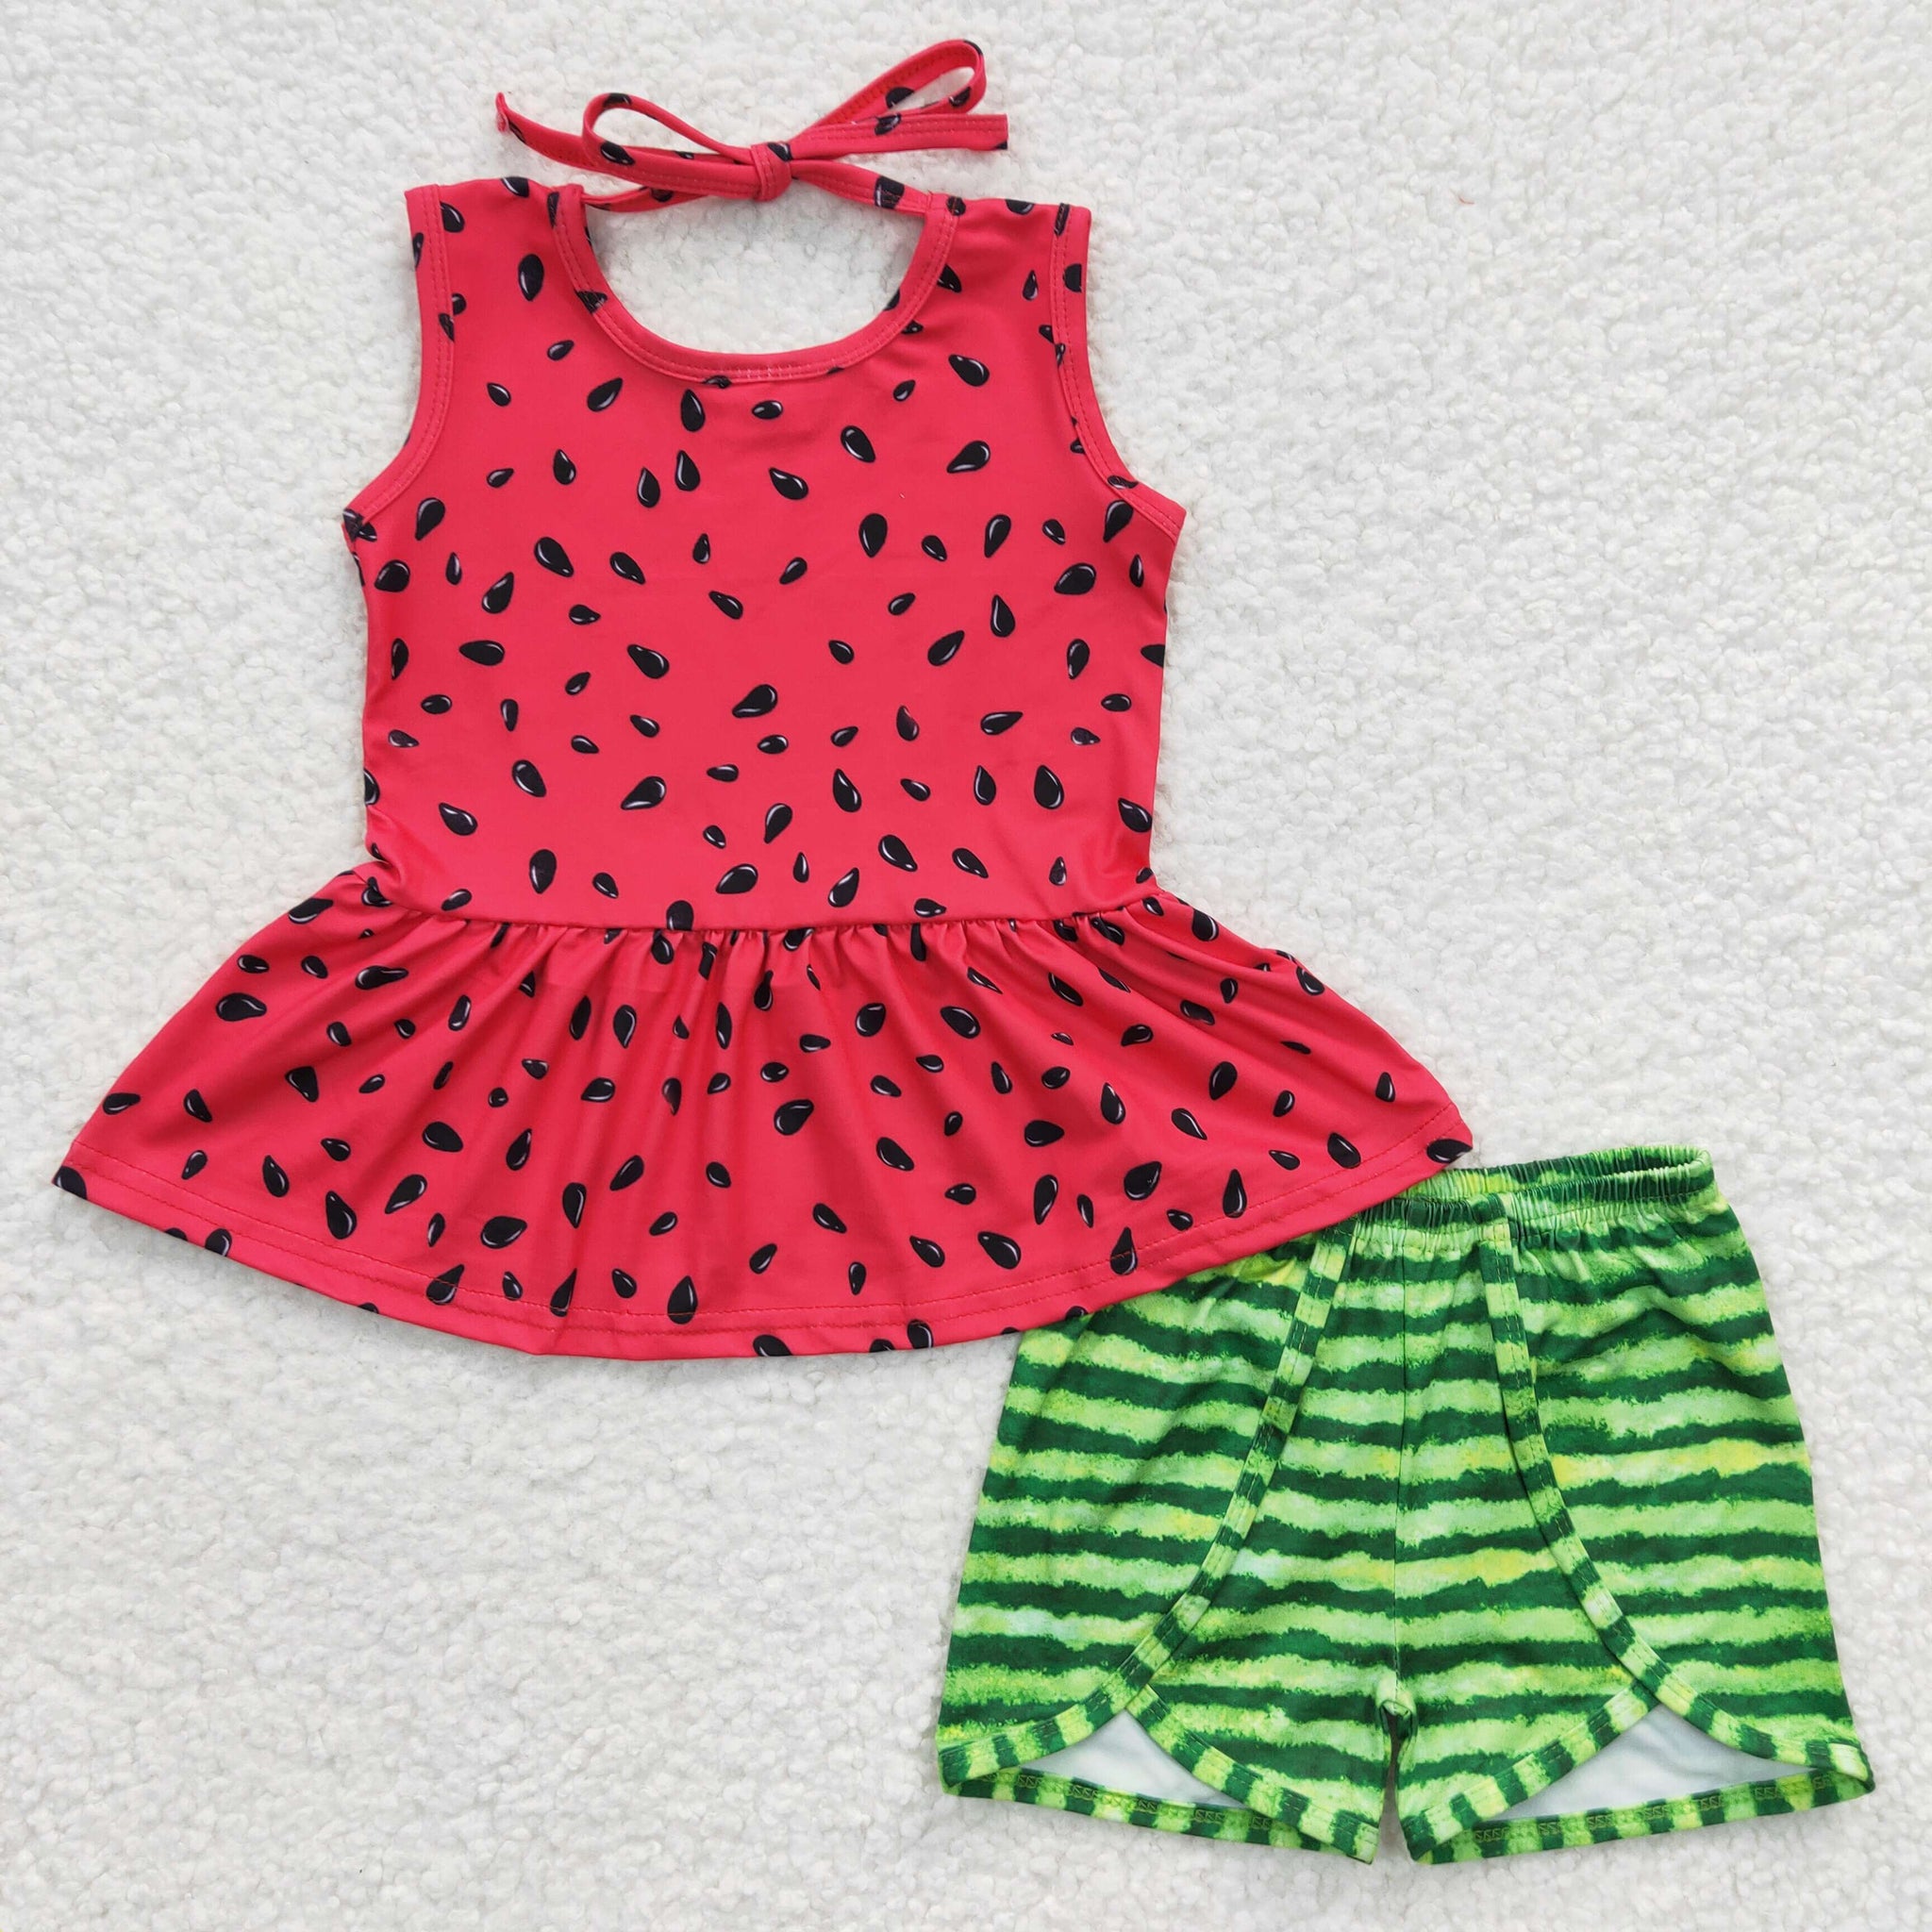 GSSO0192 kids clothes girls watermelon summer outfits